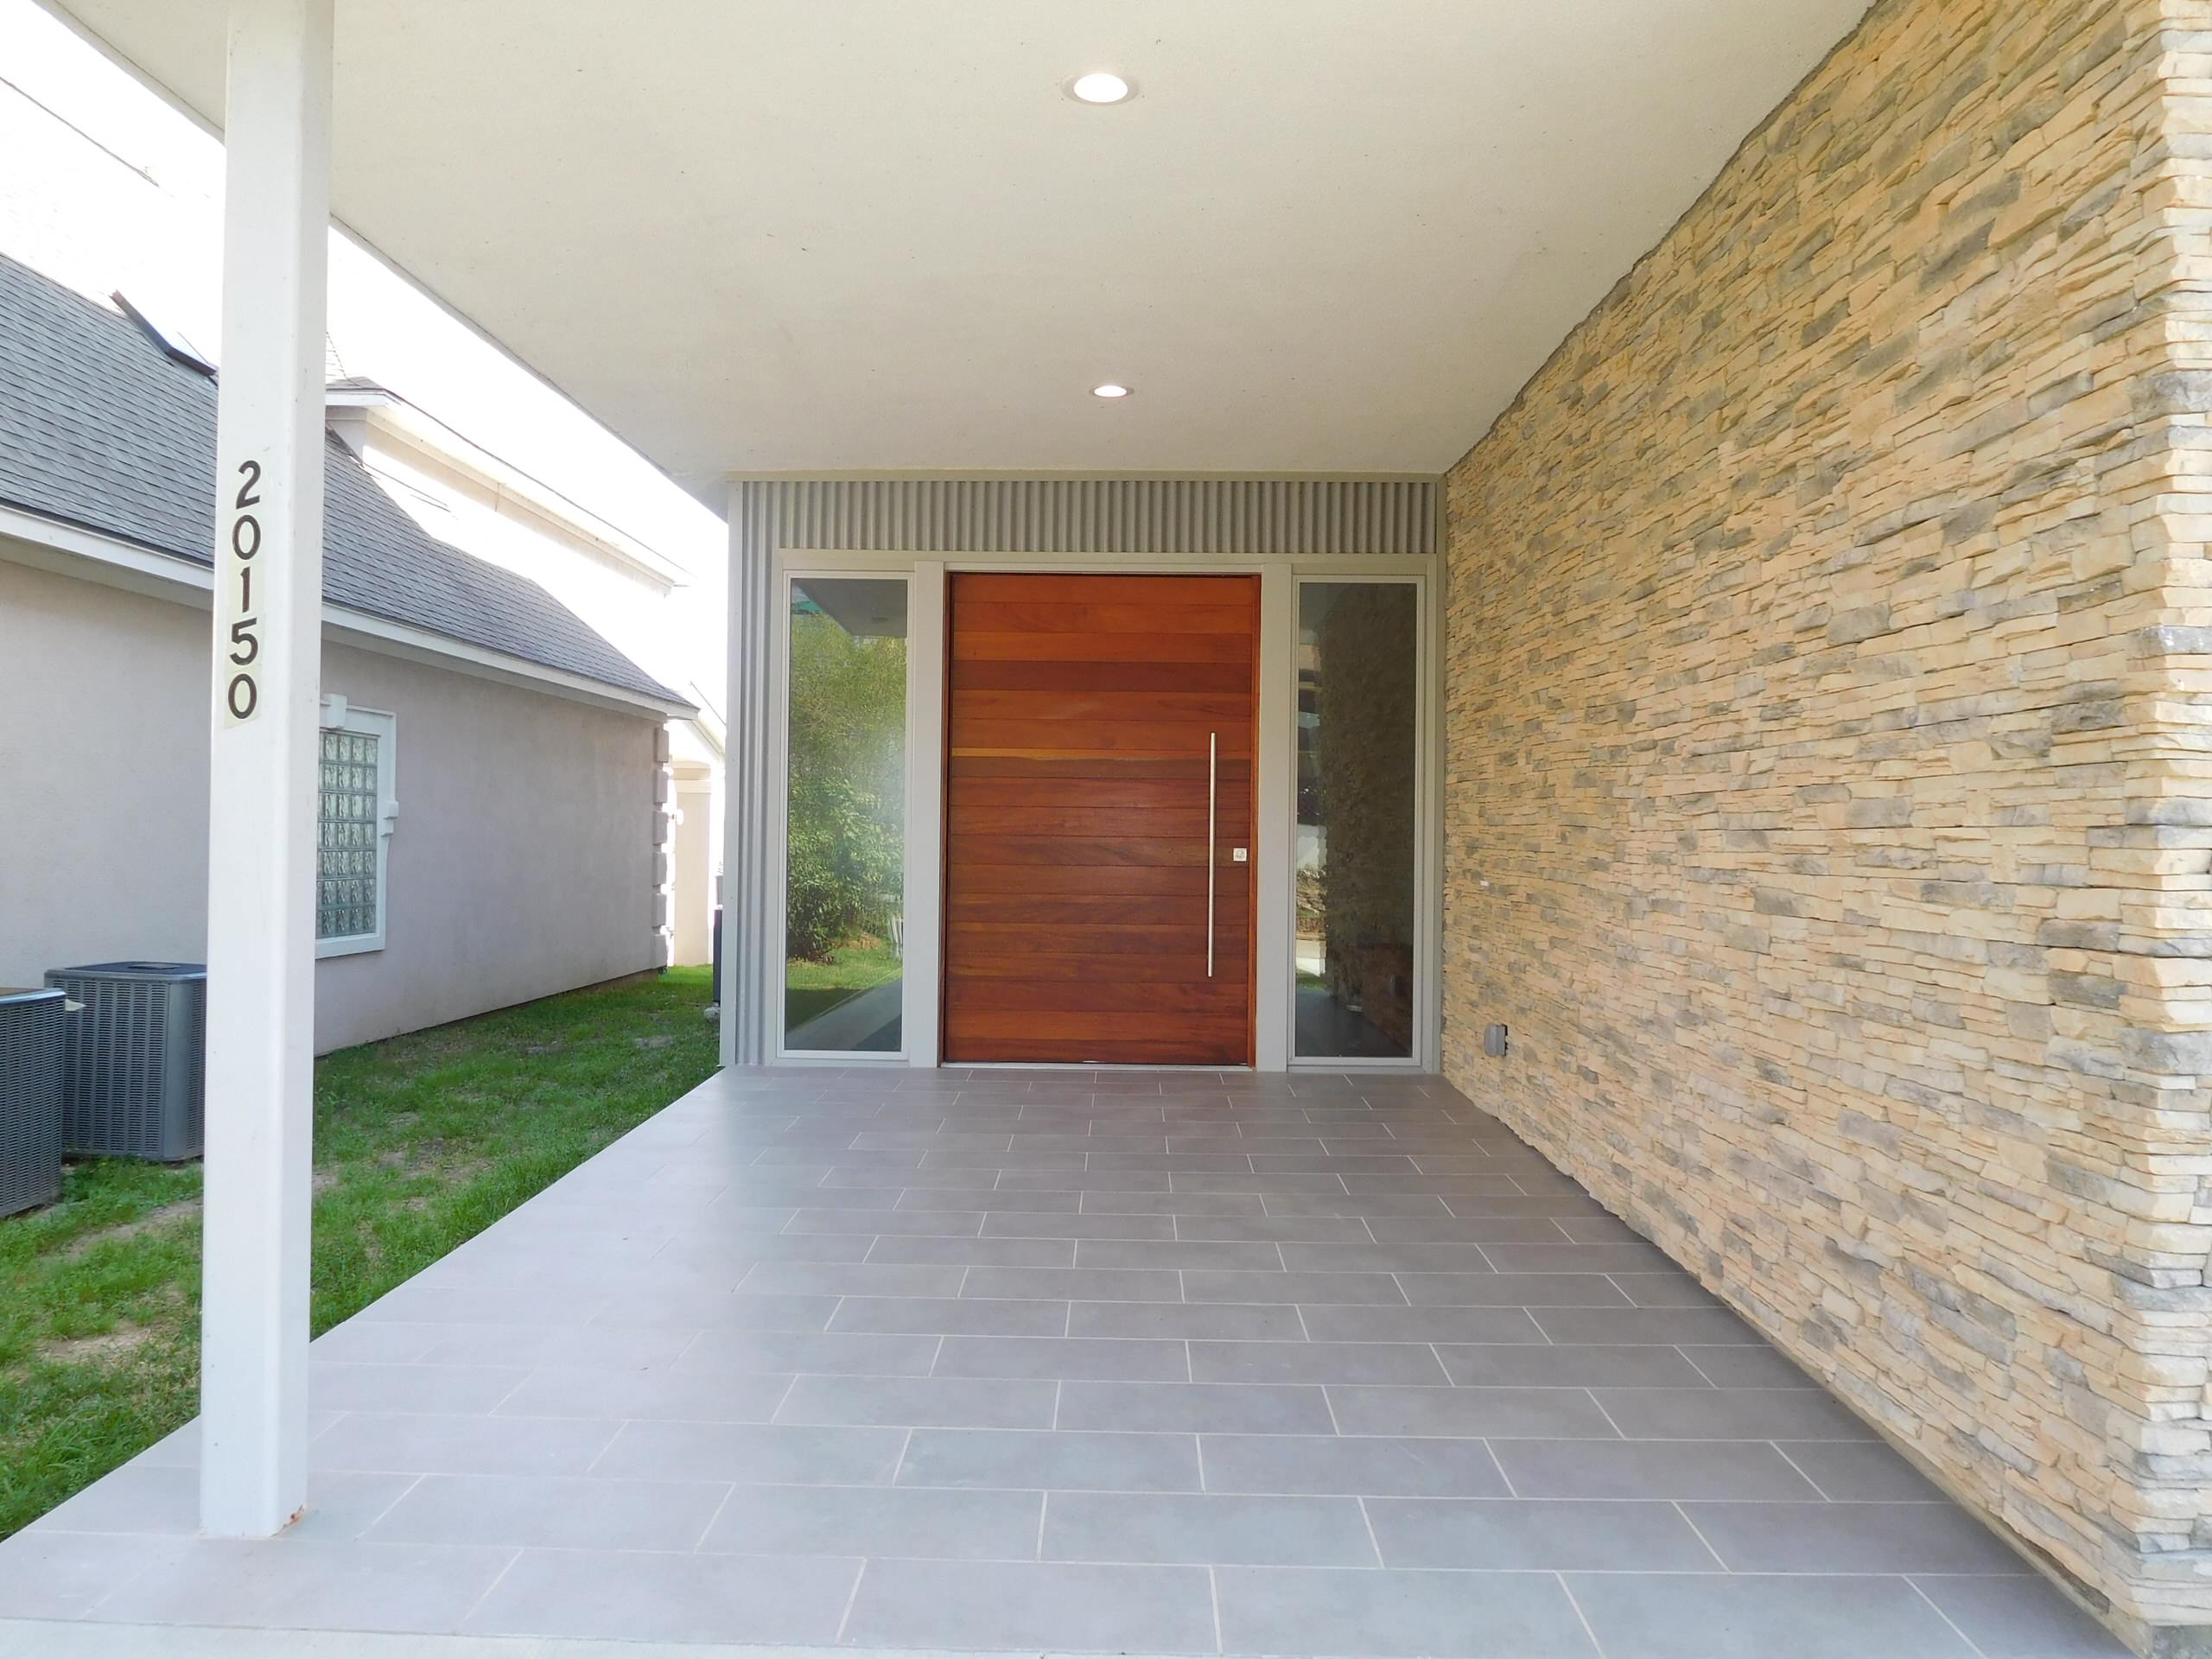 Covered entry with large pivot door